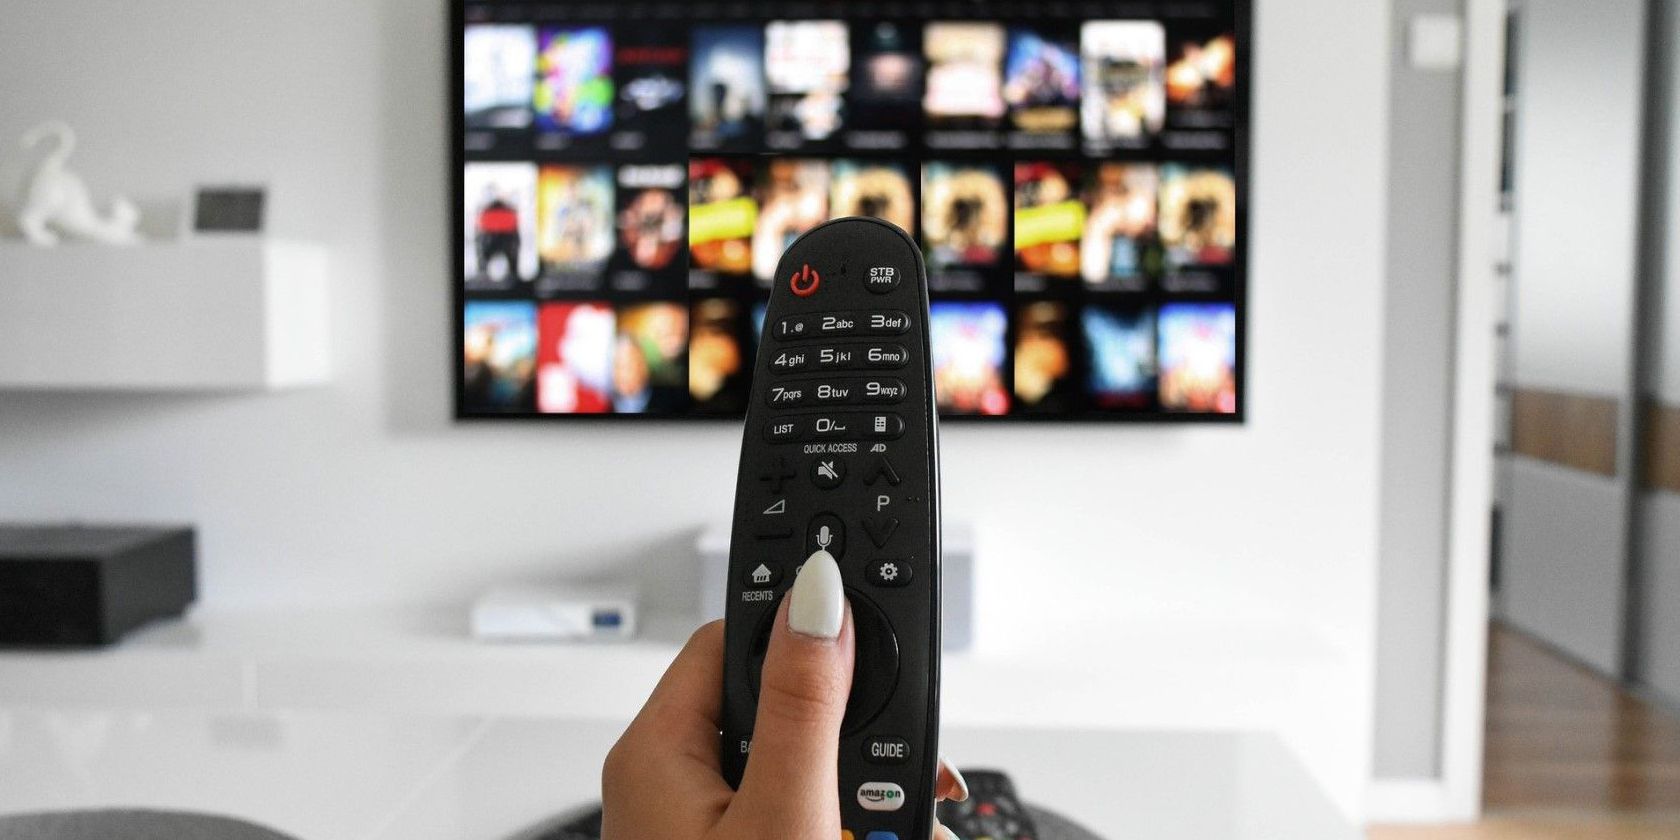 How to Add external storage to your  FireTV Stick via USB Drive -  Dignited